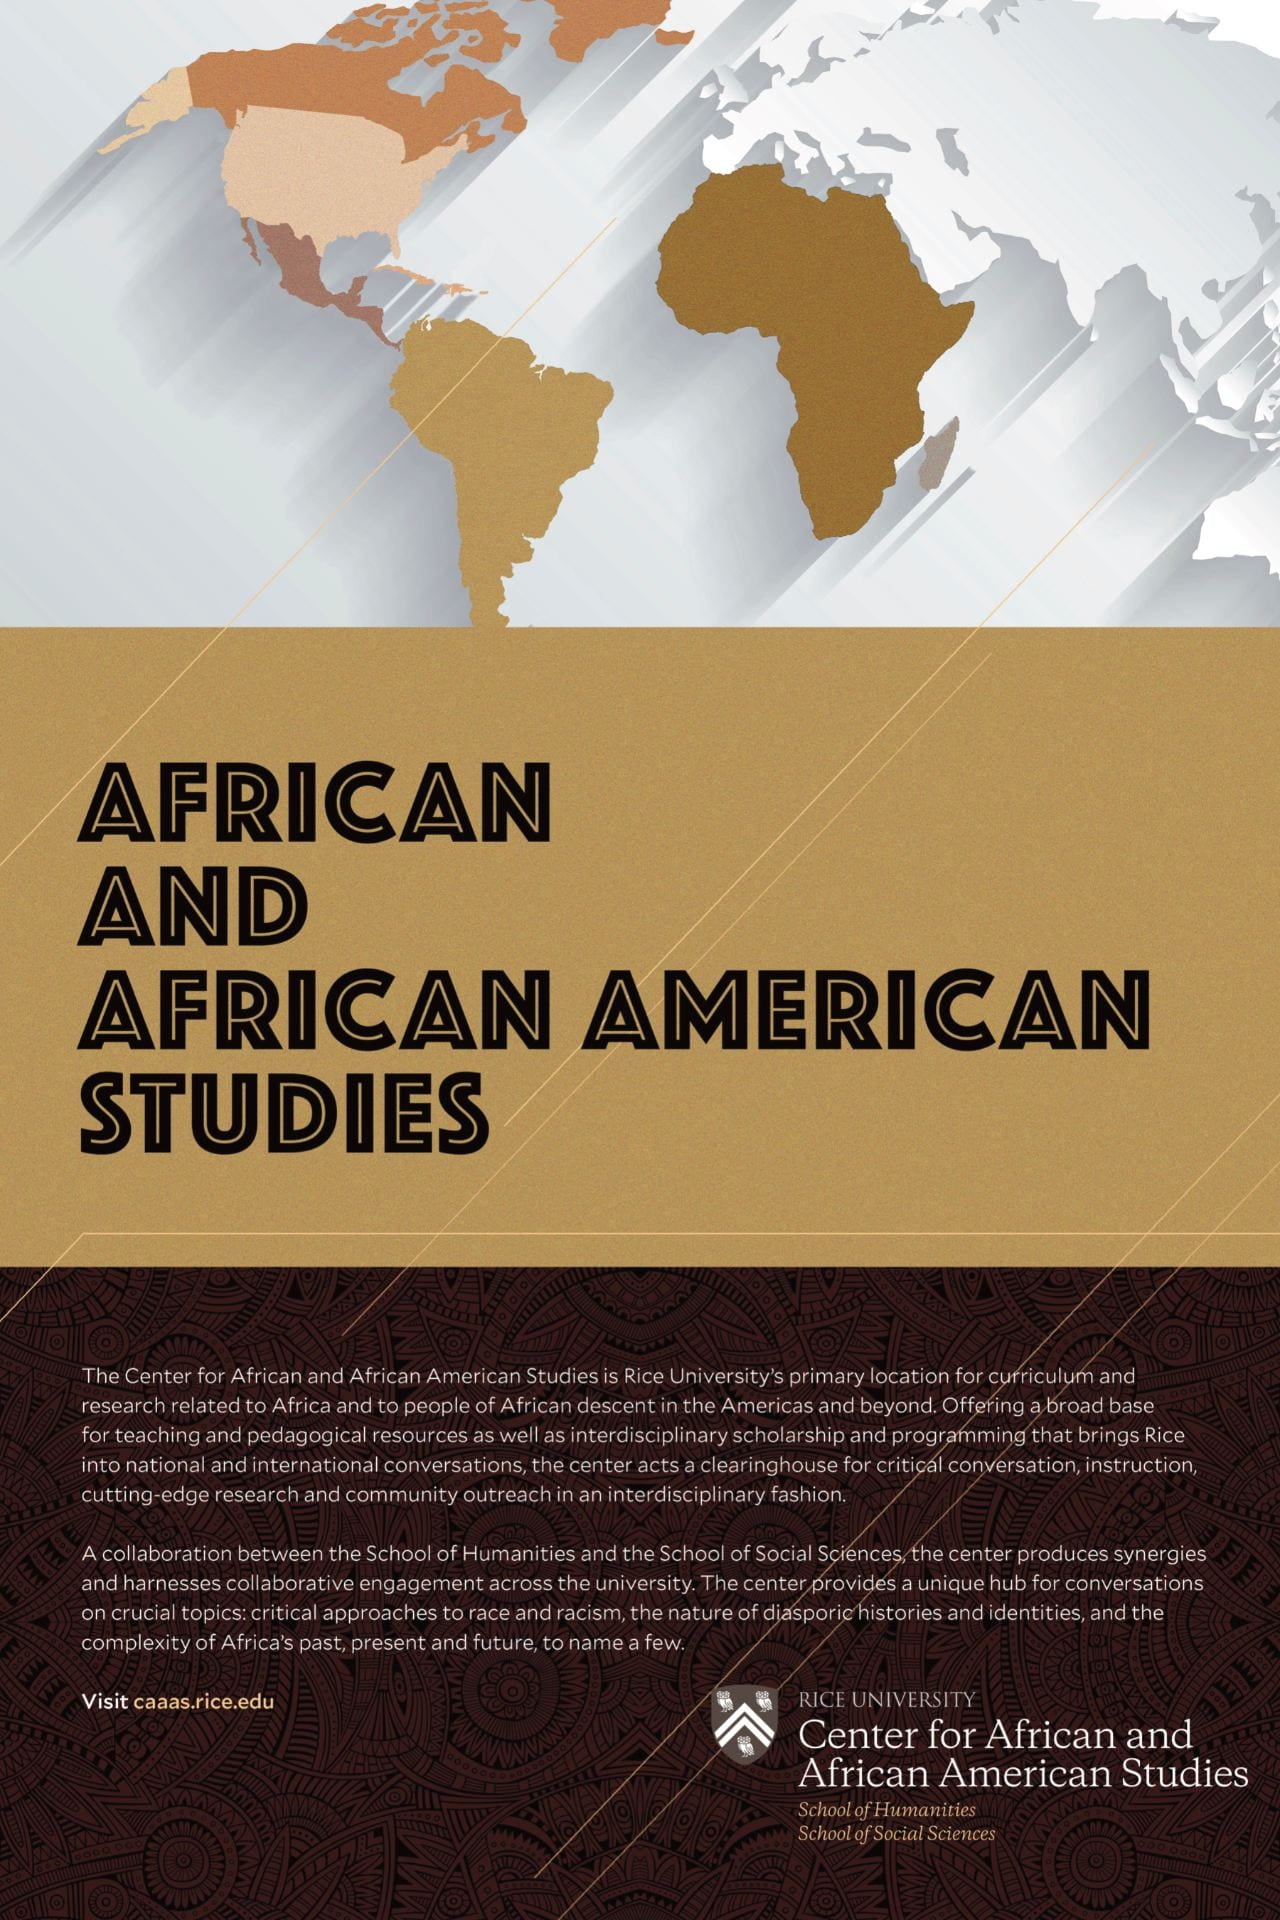 Rice introduces Center for African and African American Studies